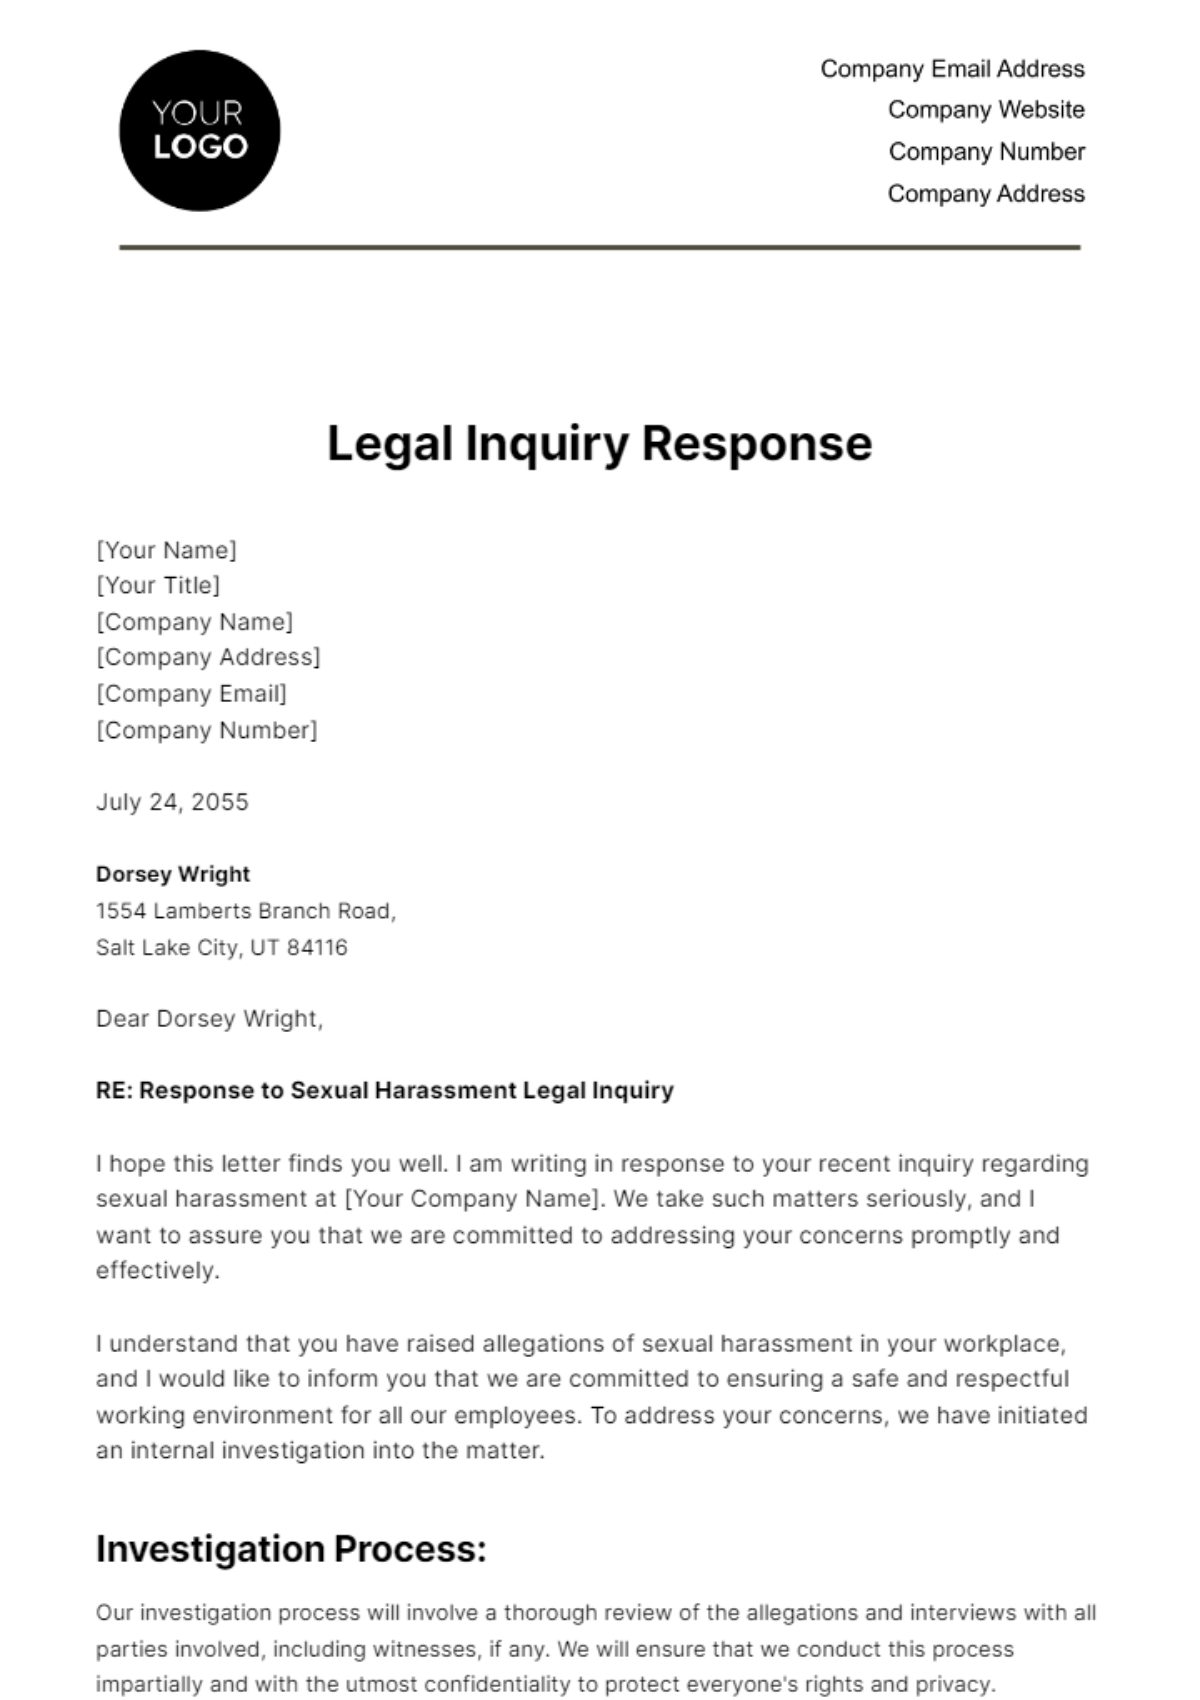 Free Legal Inquiry Response HR Template